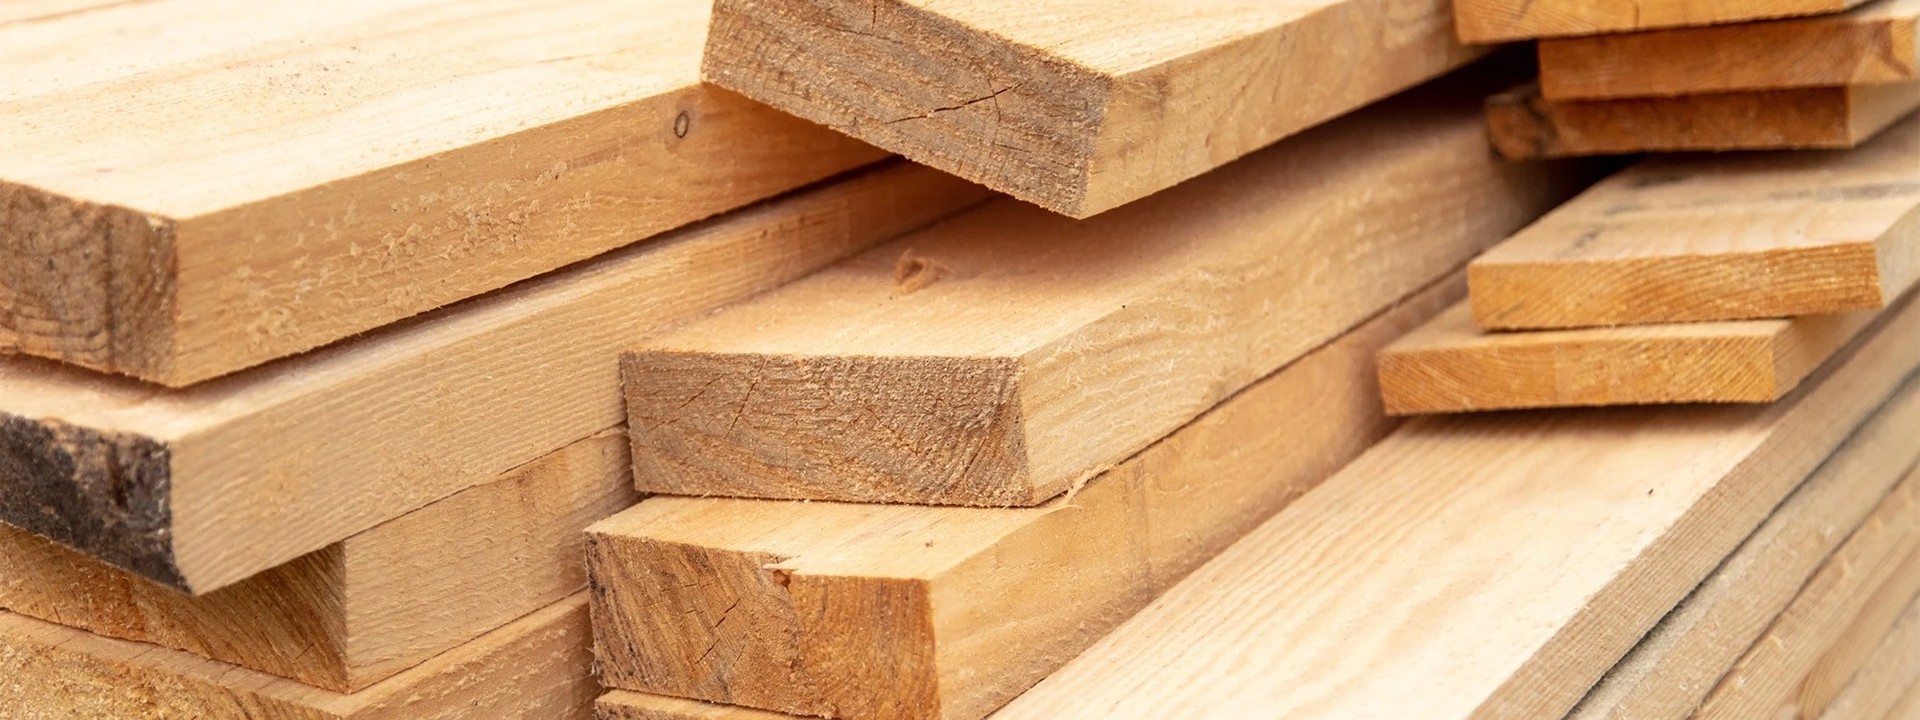 Timber Background